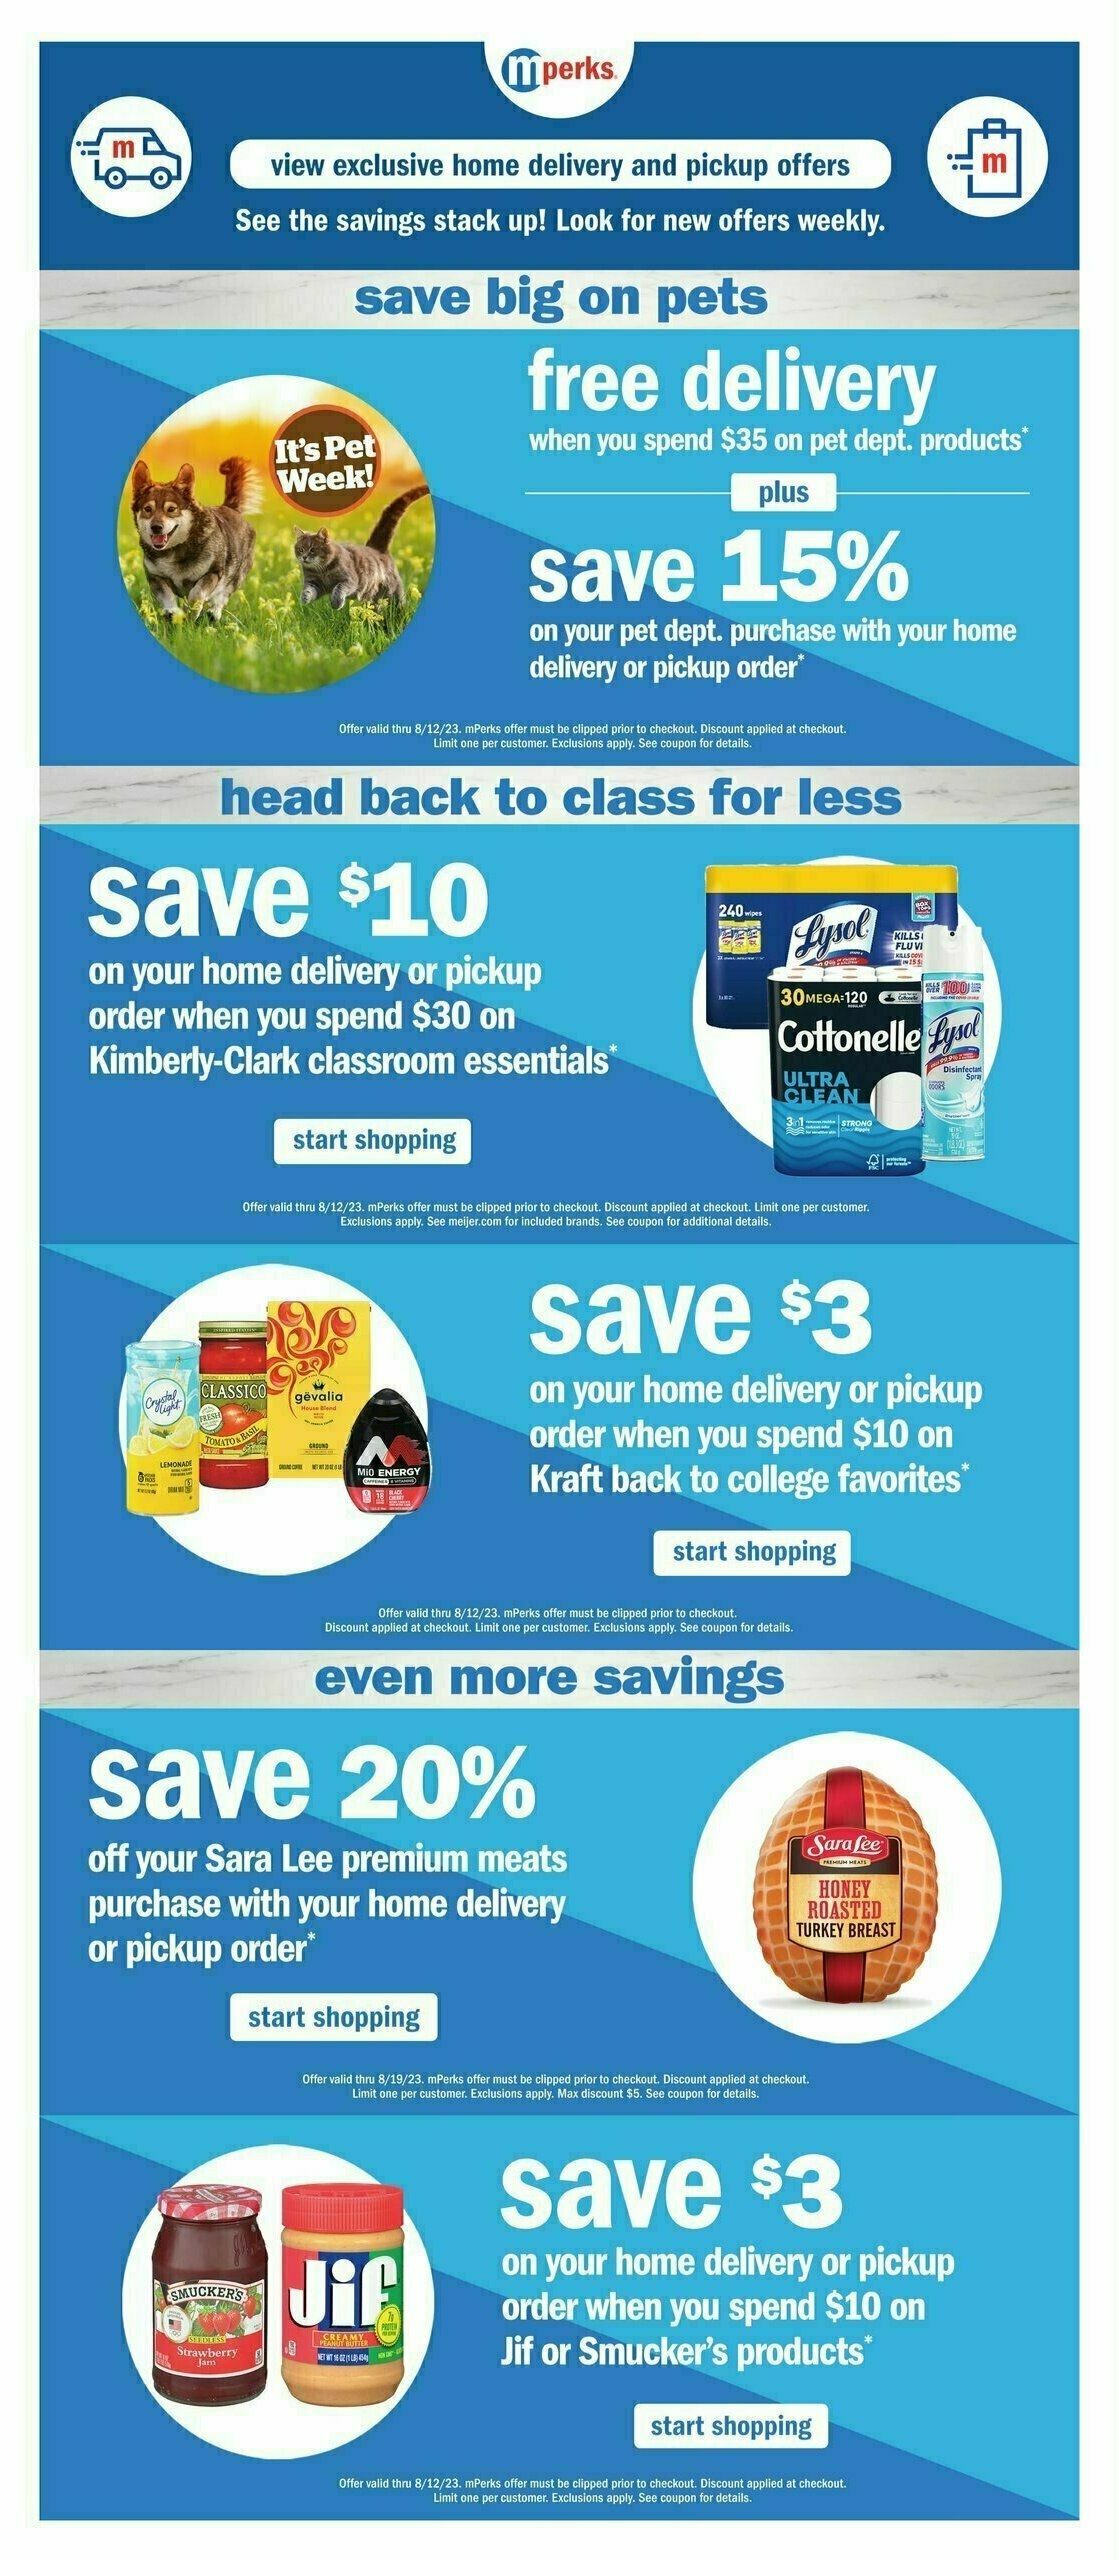 Meijer Weekly Ad from August 6